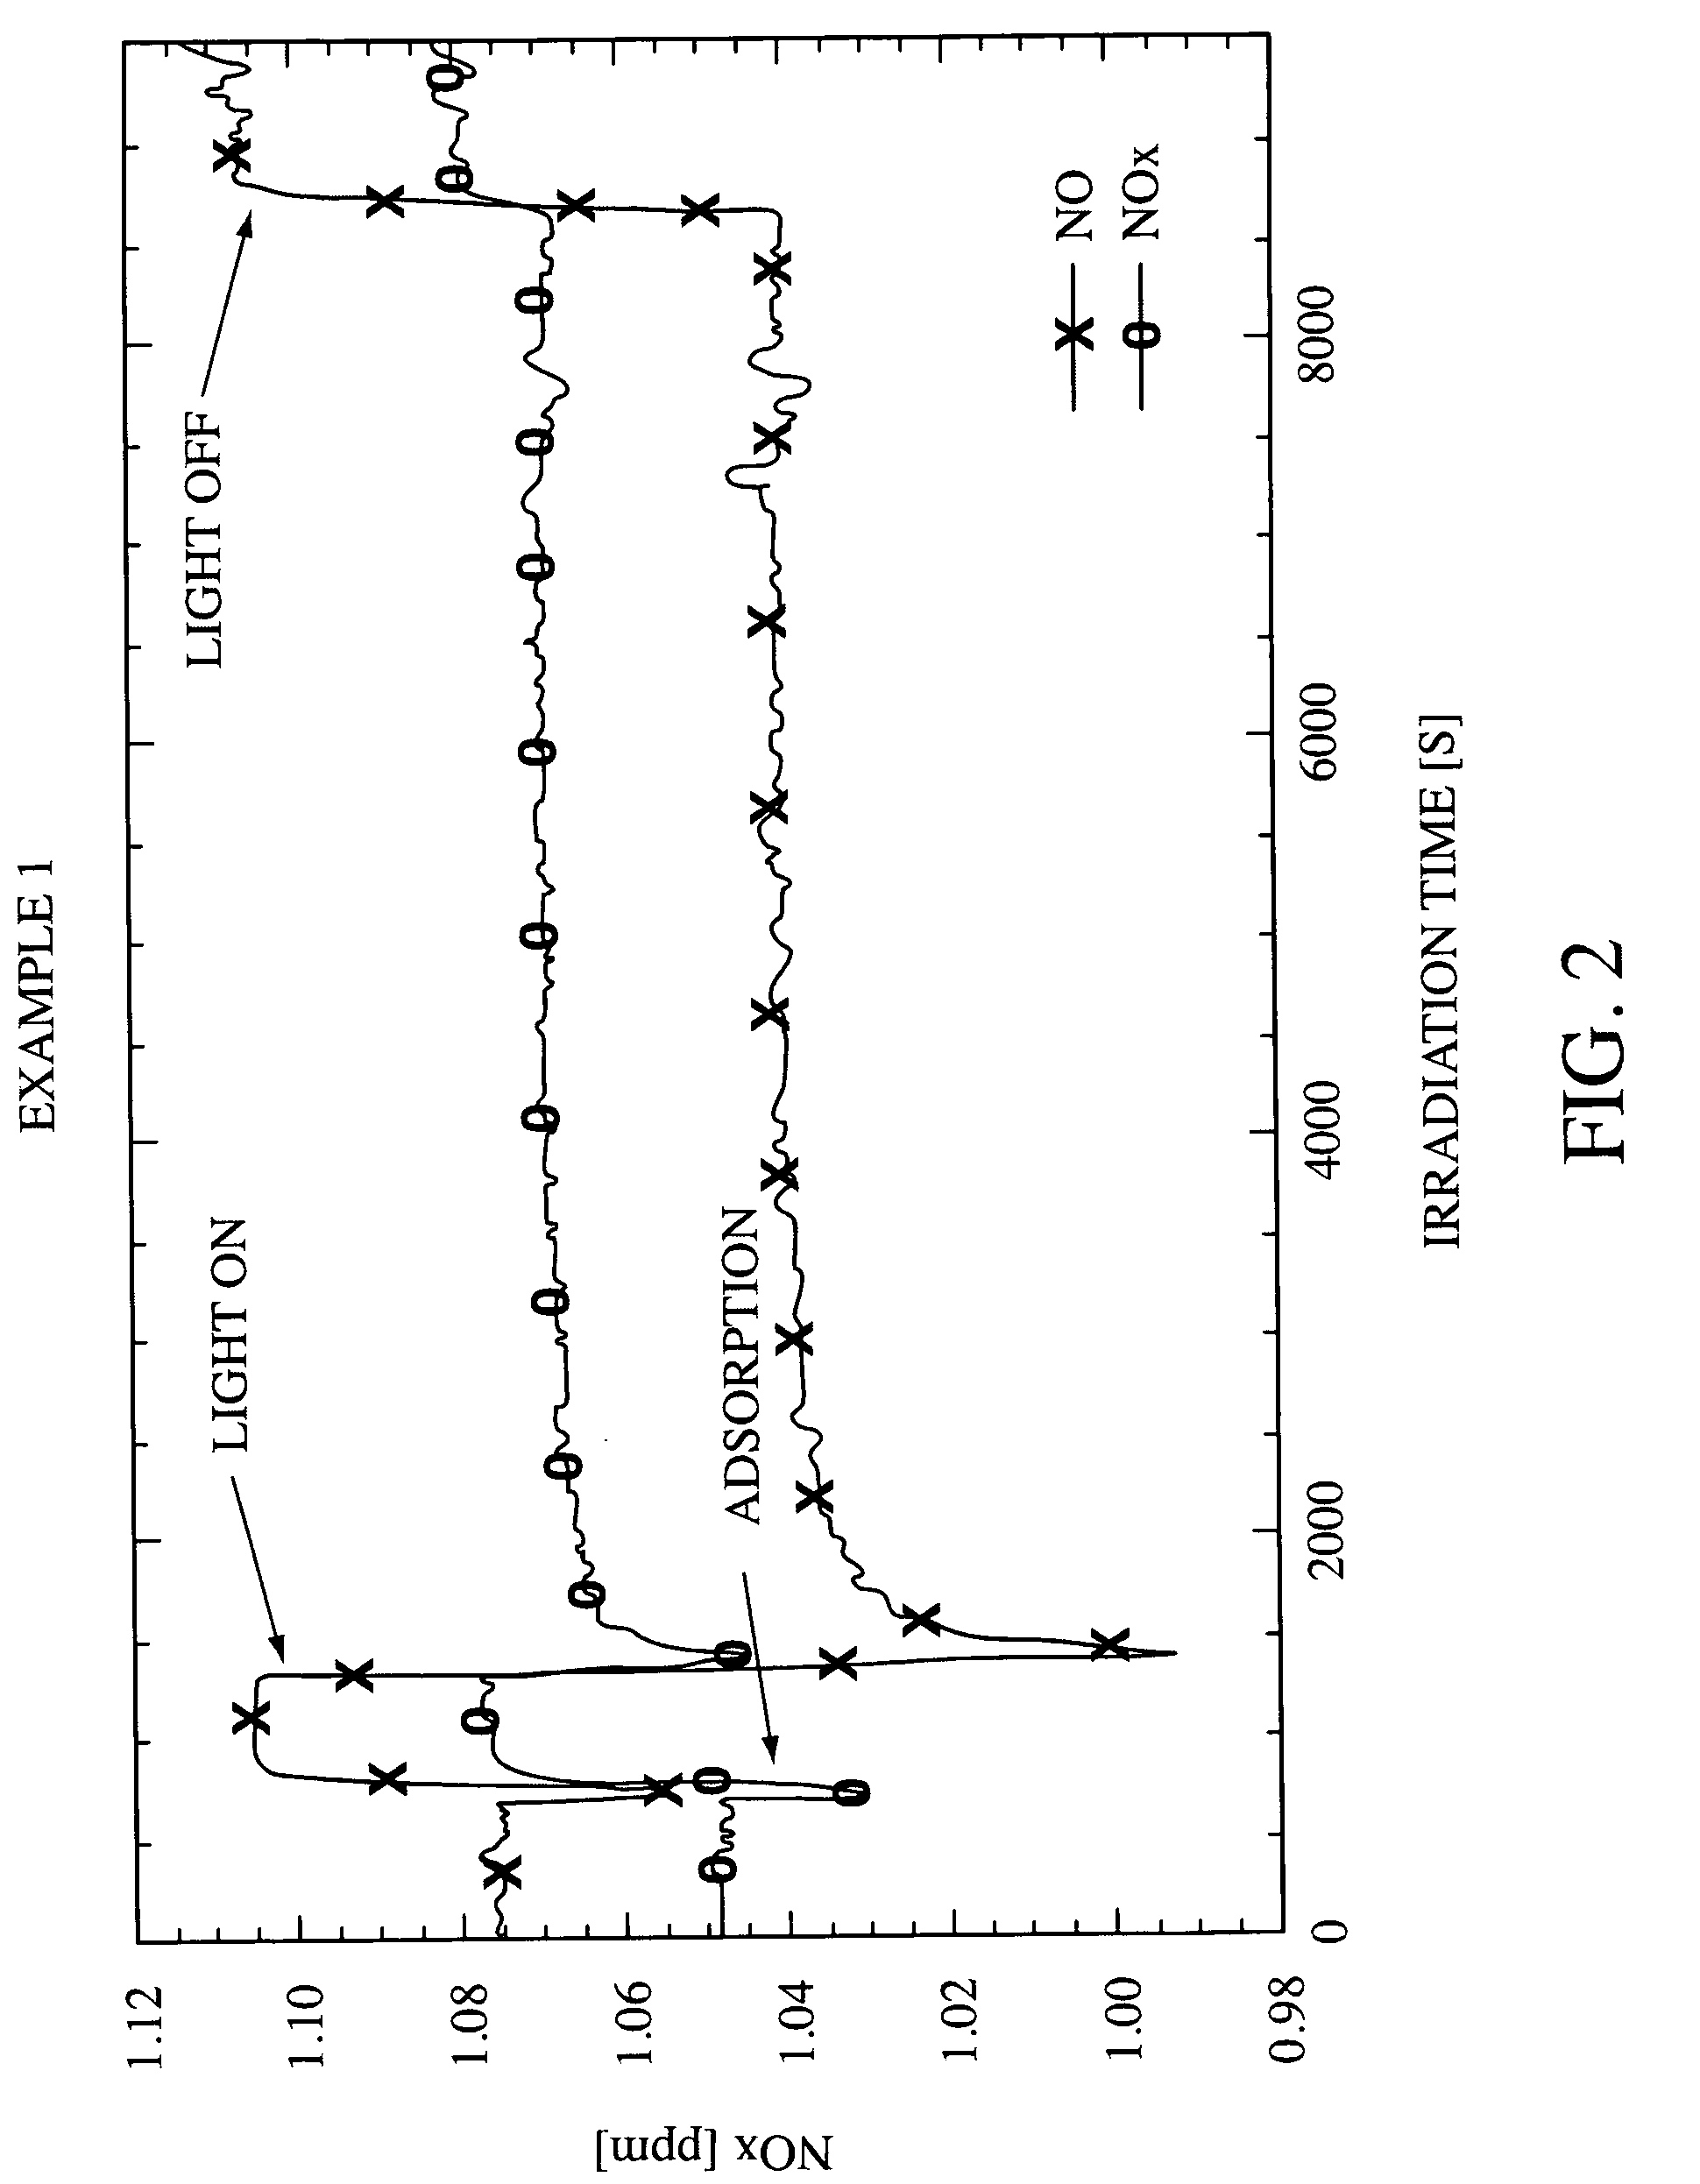 Photocatalytically activated structural components composed of a matrix bound with a mineral binder, as well as method for production of the structural components